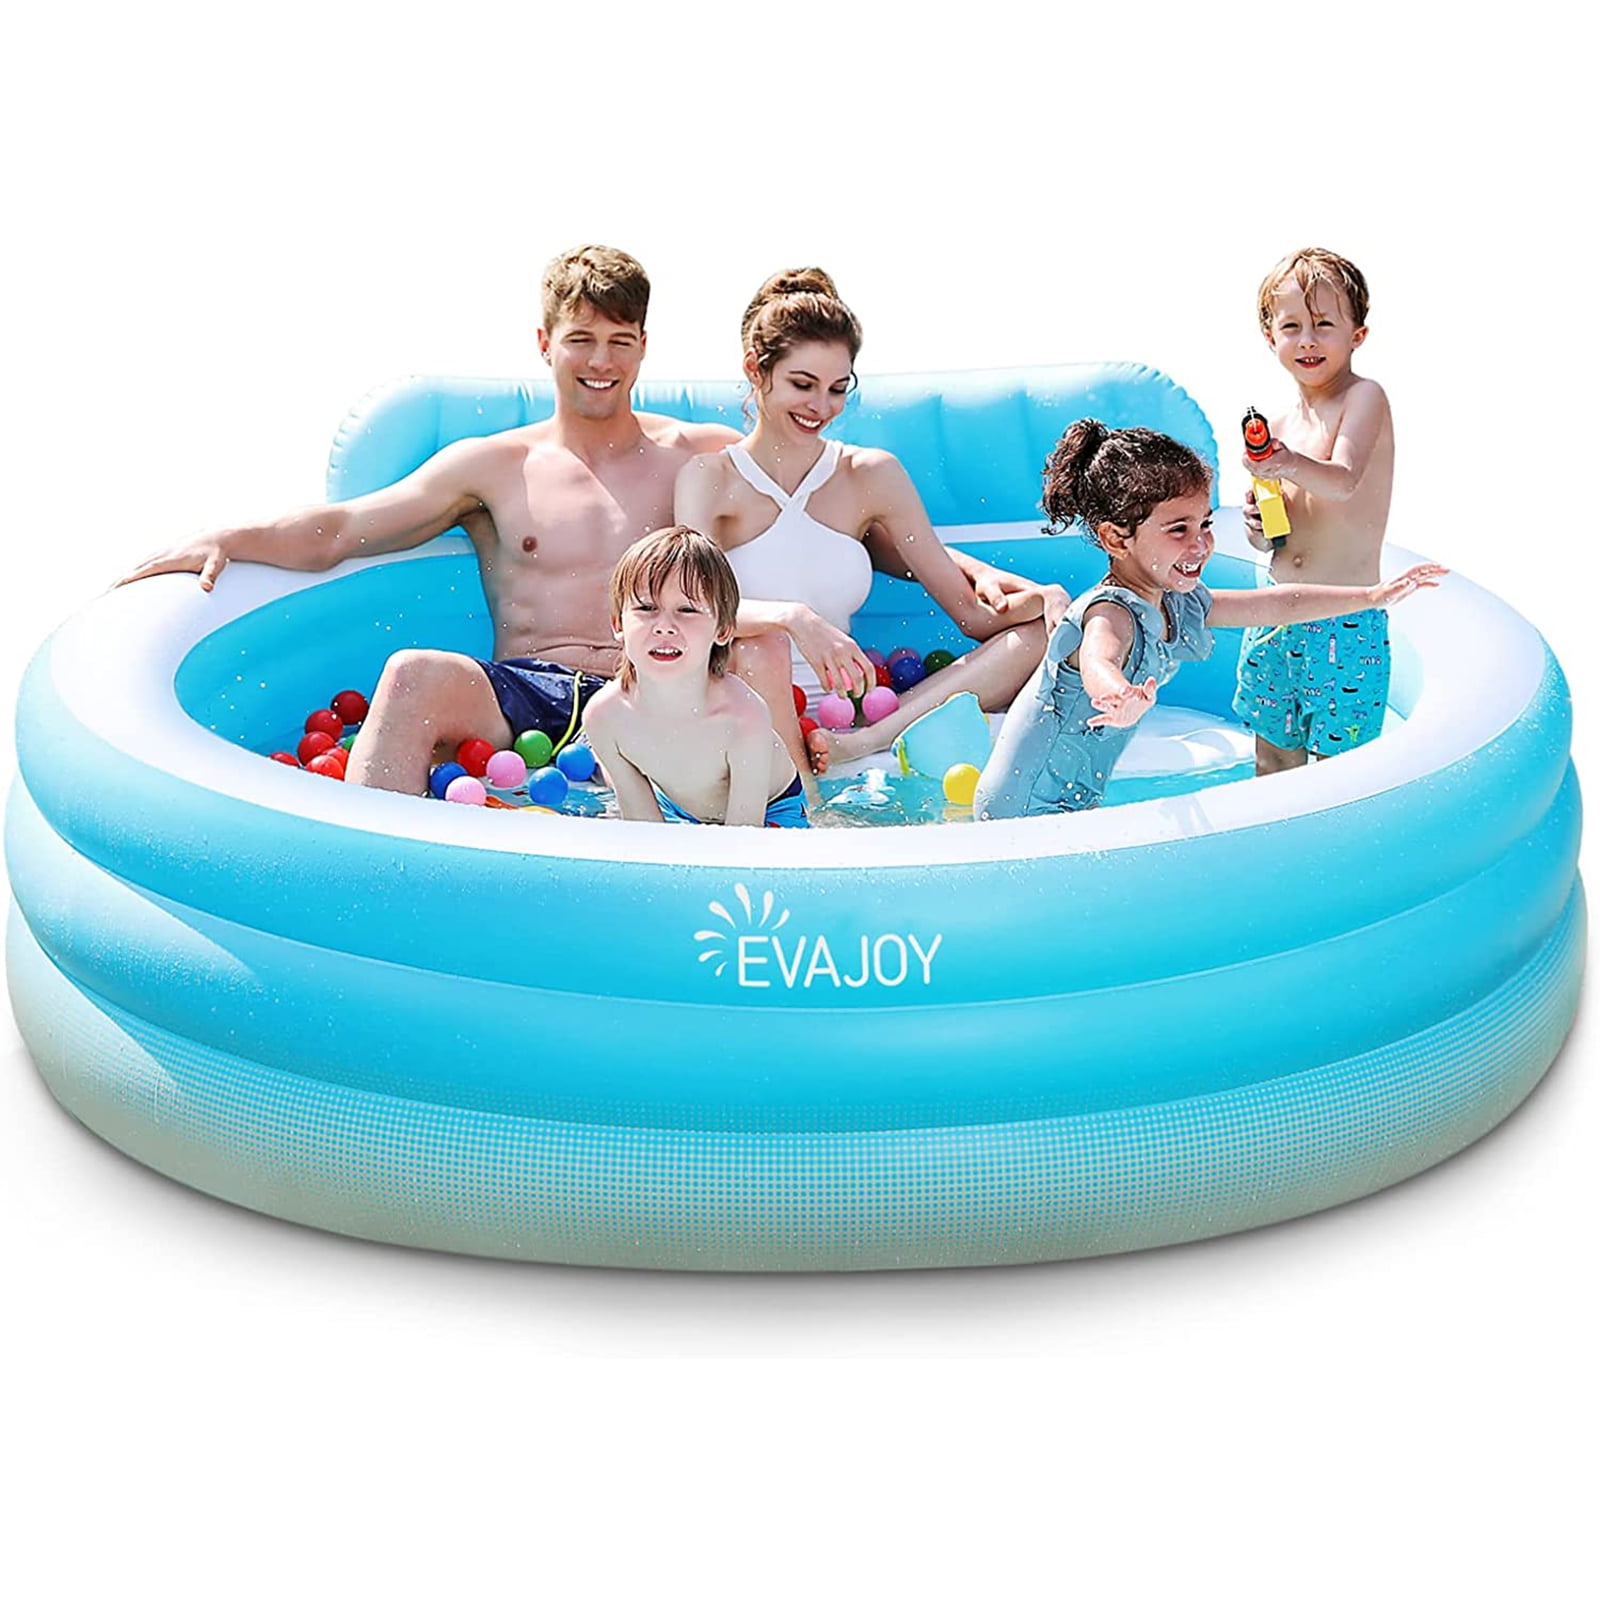 PVC Thickened Paddling Pool Swim Centre for Children Adults Outdoors Garden N/L Inflatable Family Pool 1.8/2m Rectangular Swimming Pool Summer Water Party 